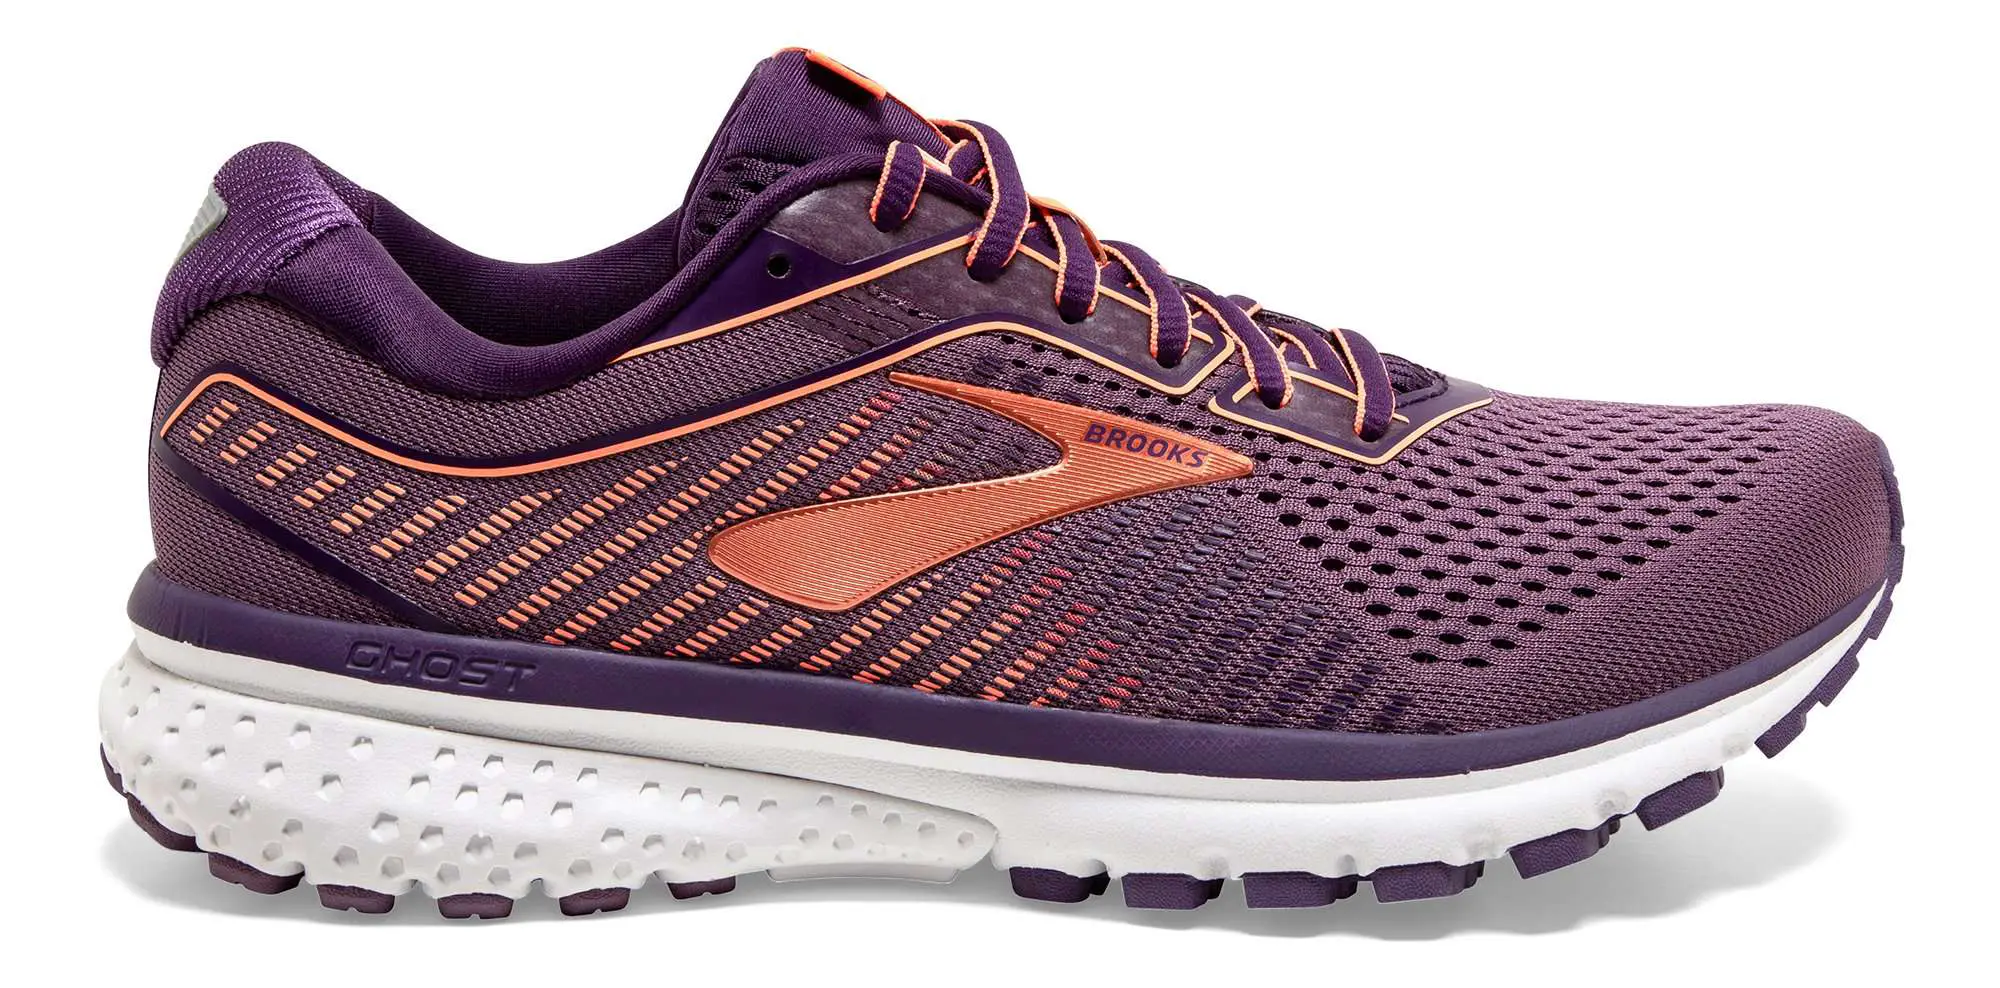 Best Running Shoes for High Arches 2020